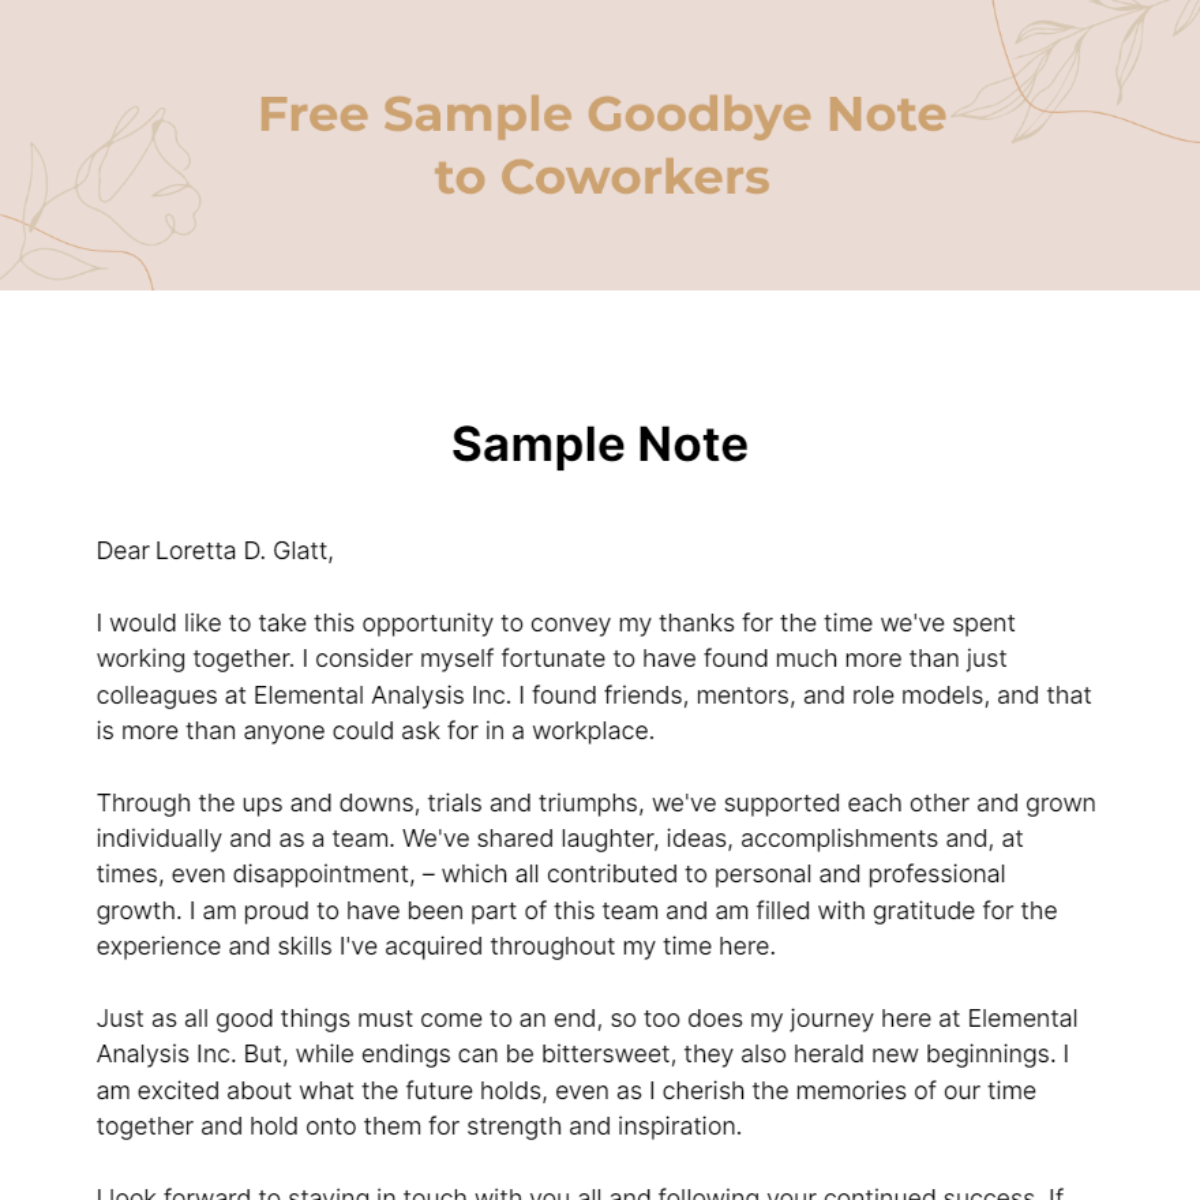 Free Sample Goodbye Note to Coworkers Template